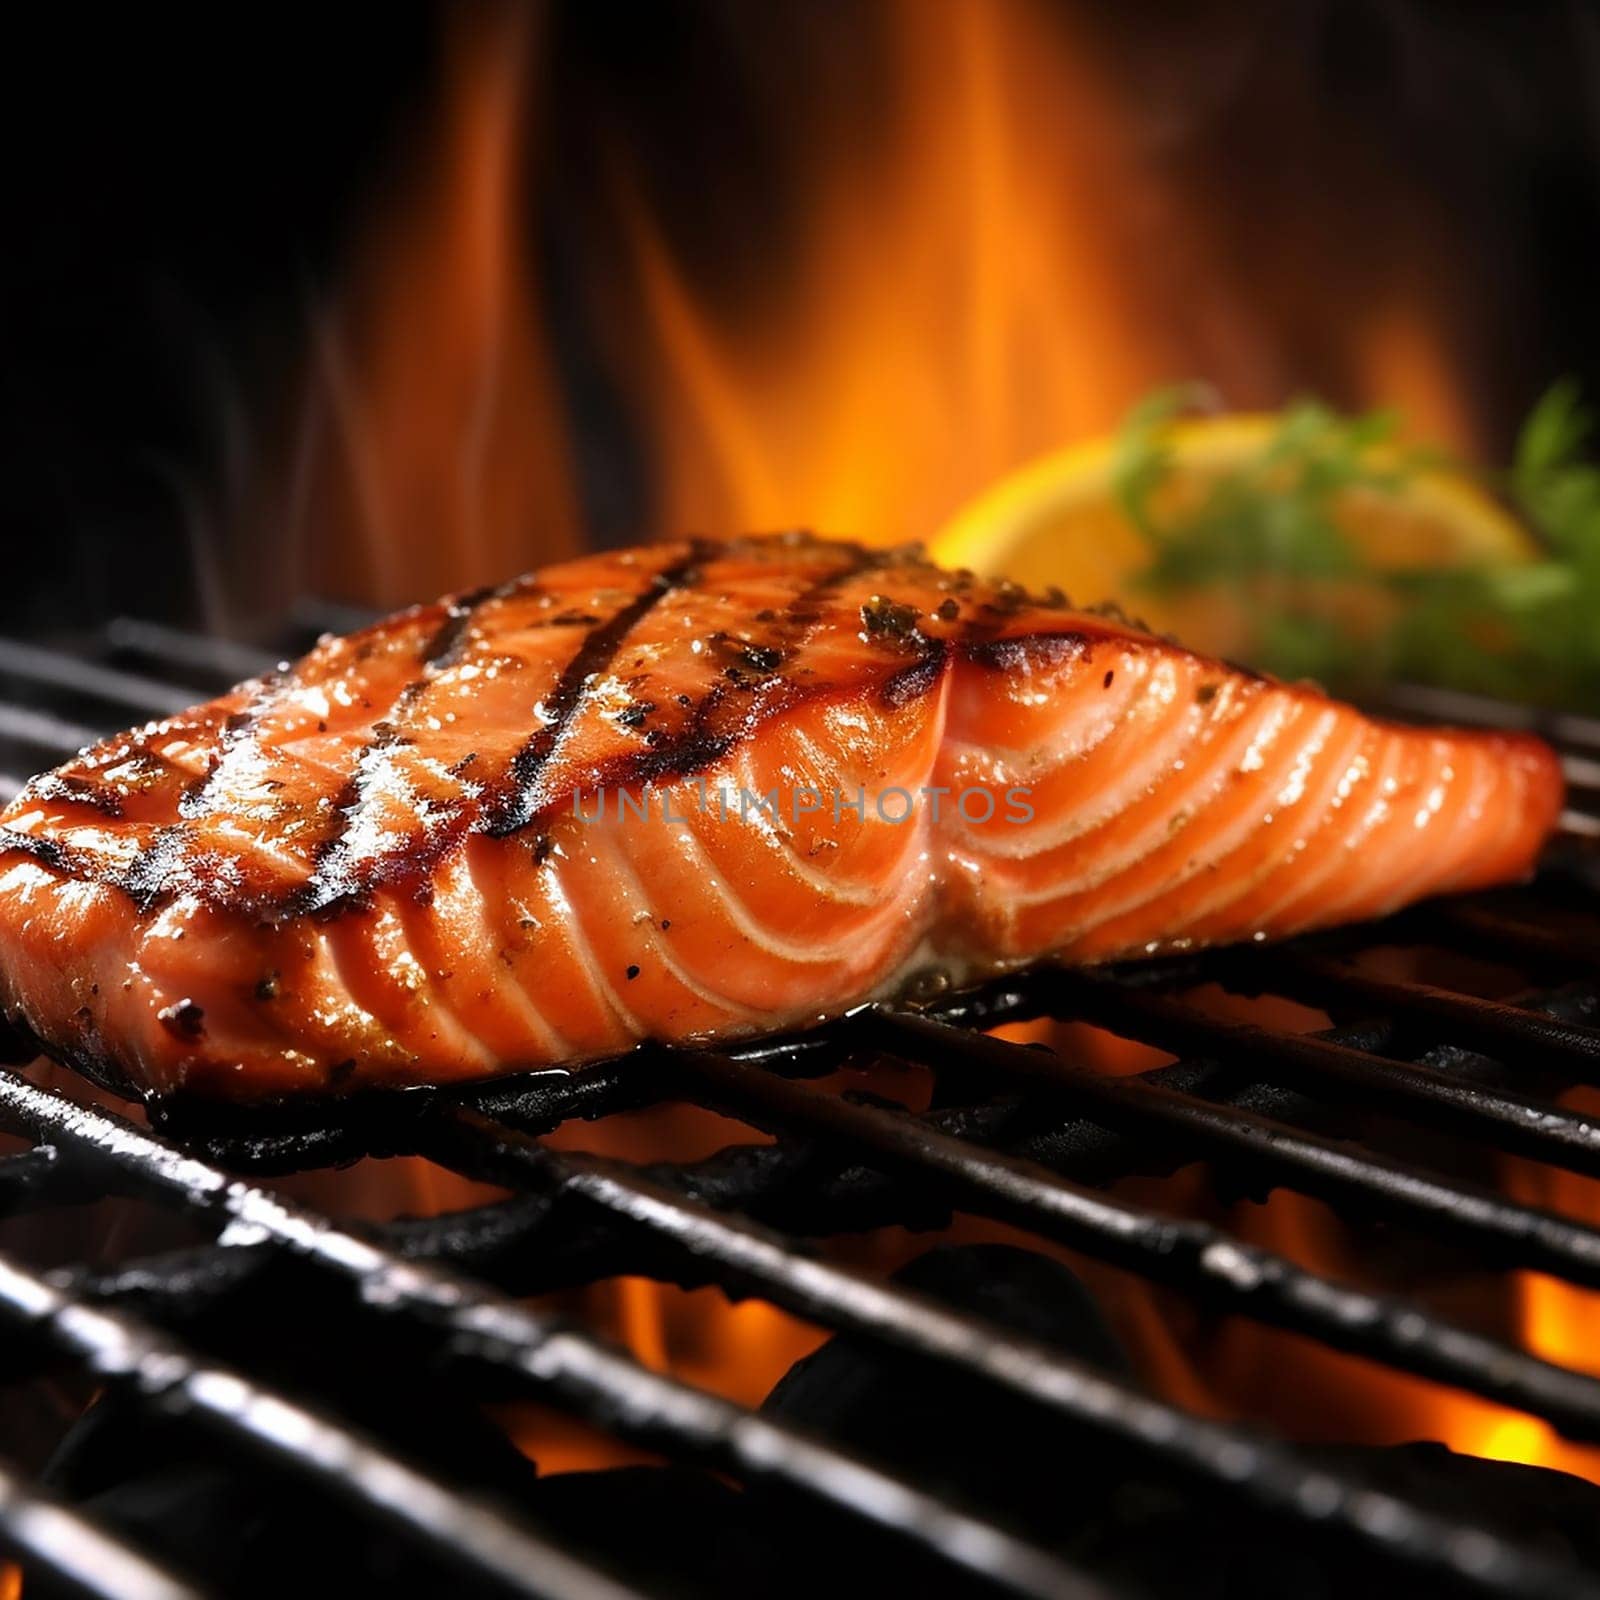 Grilled salmon fillet with char marks on a barbecue grill with flames